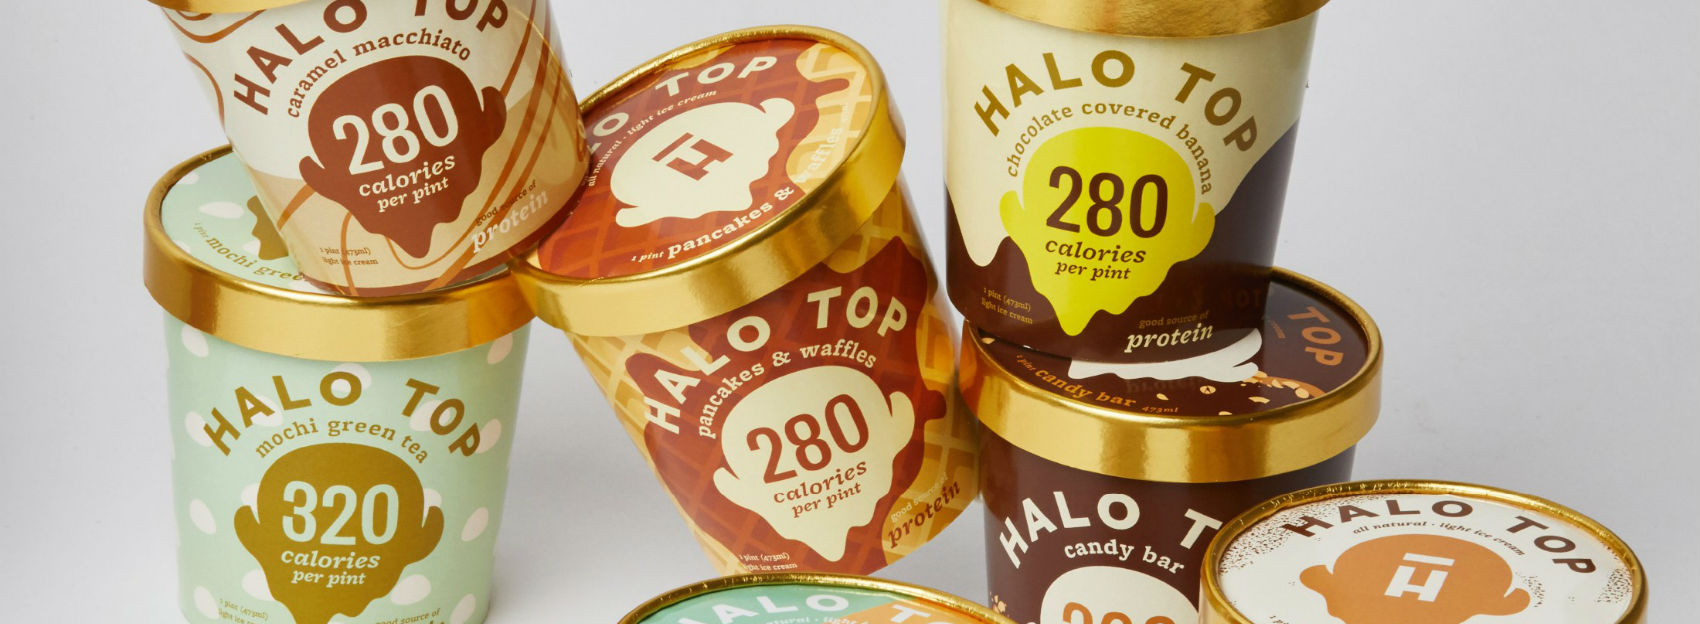 Halo Top Ice Review - Step One